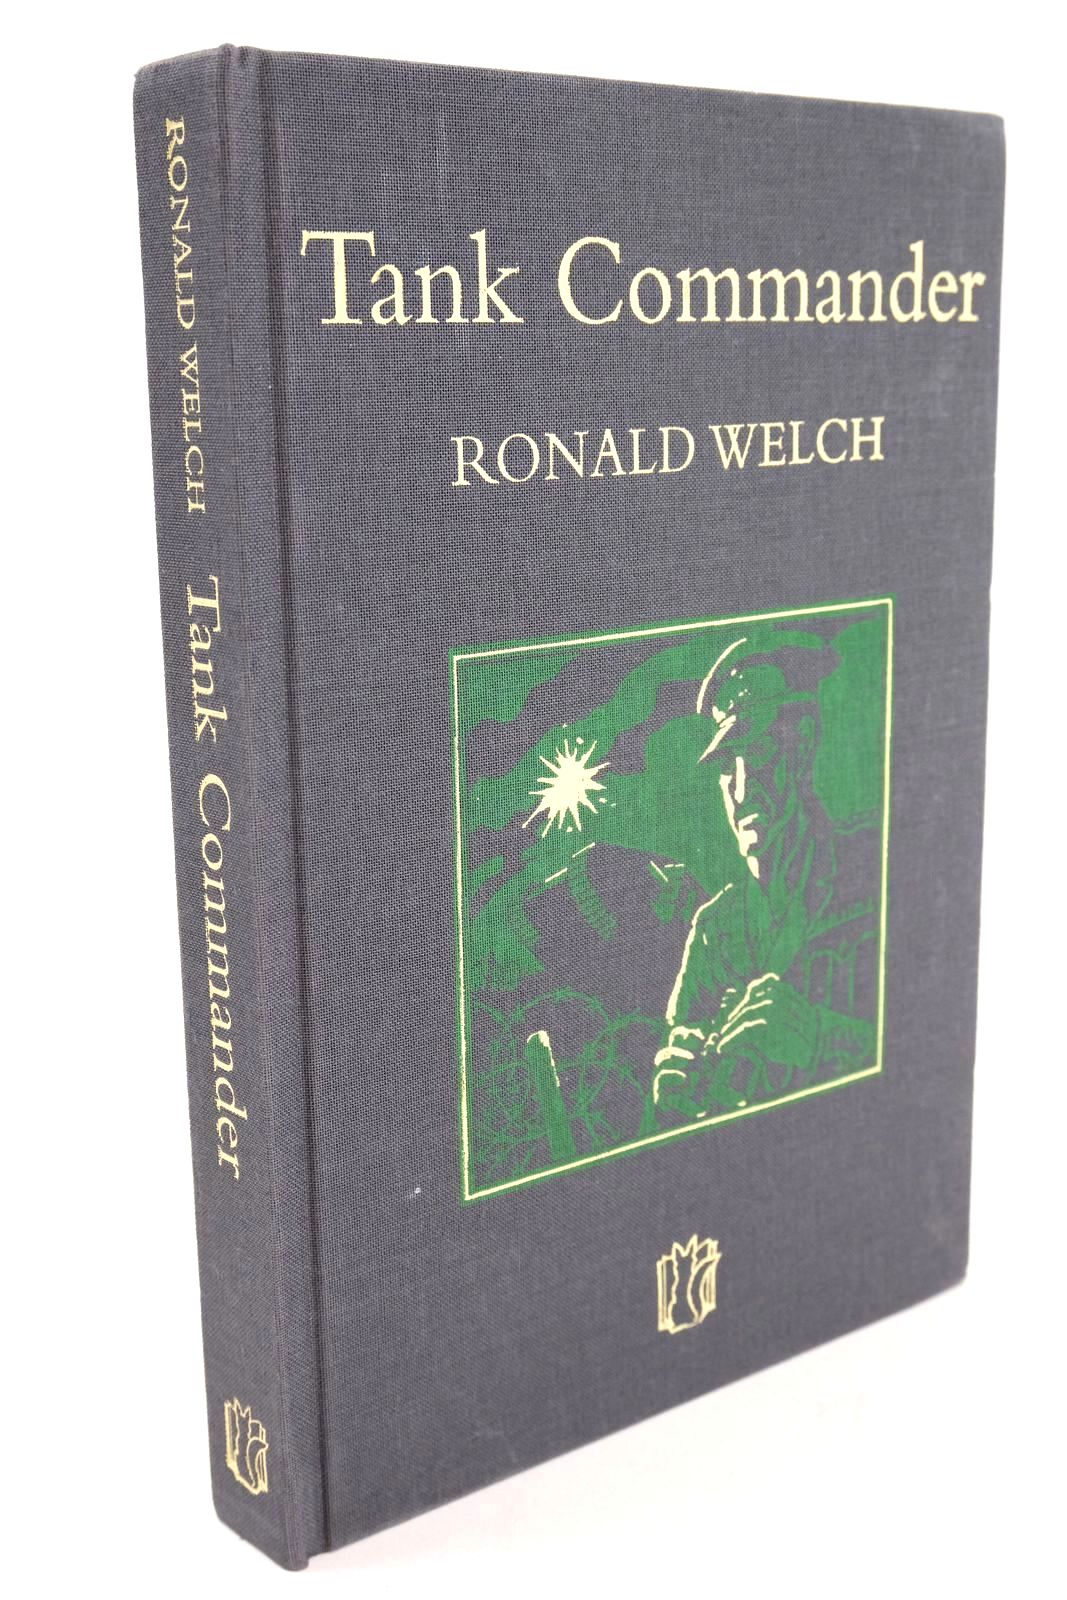 Photo of TANK COMMANDER written by Welch, Ronald illustrated by Ambrus, Victor published by Slightly Foxed Ltd. (STOCK CODE: 1324799)  for sale by Stella & Rose's Books